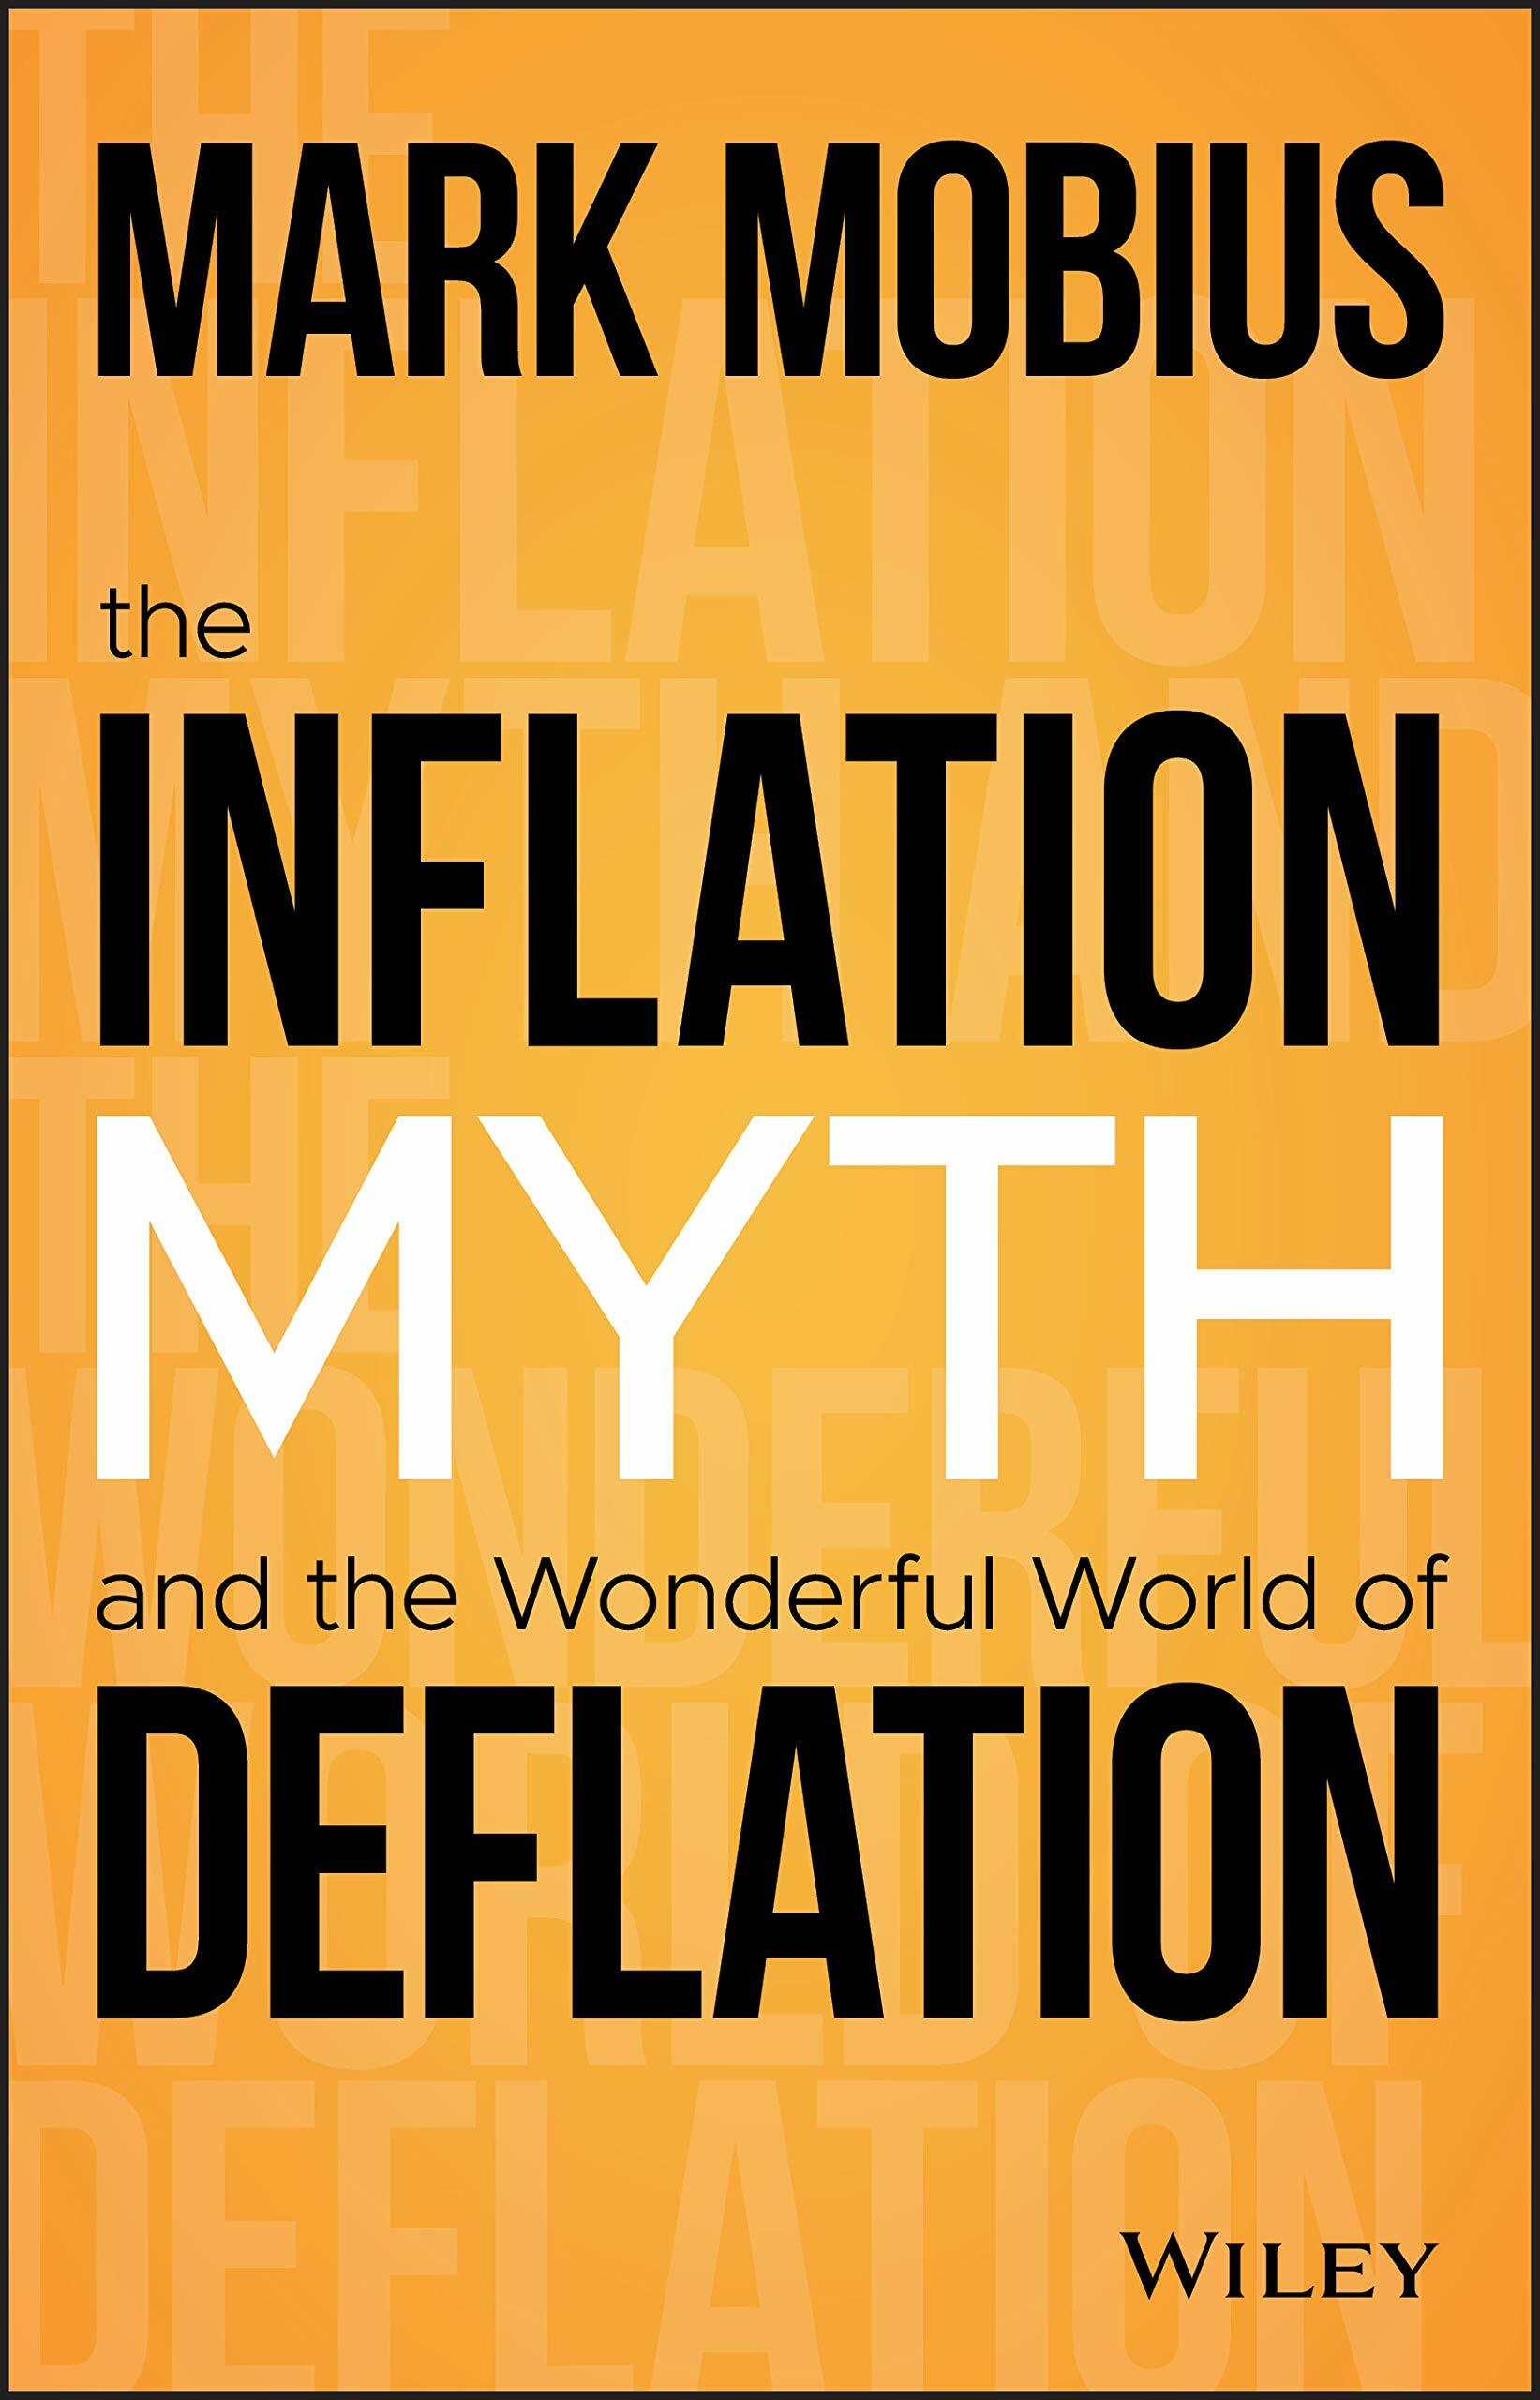 The Inflation Myth and the Wonderful World of Deflation (Hardcover)